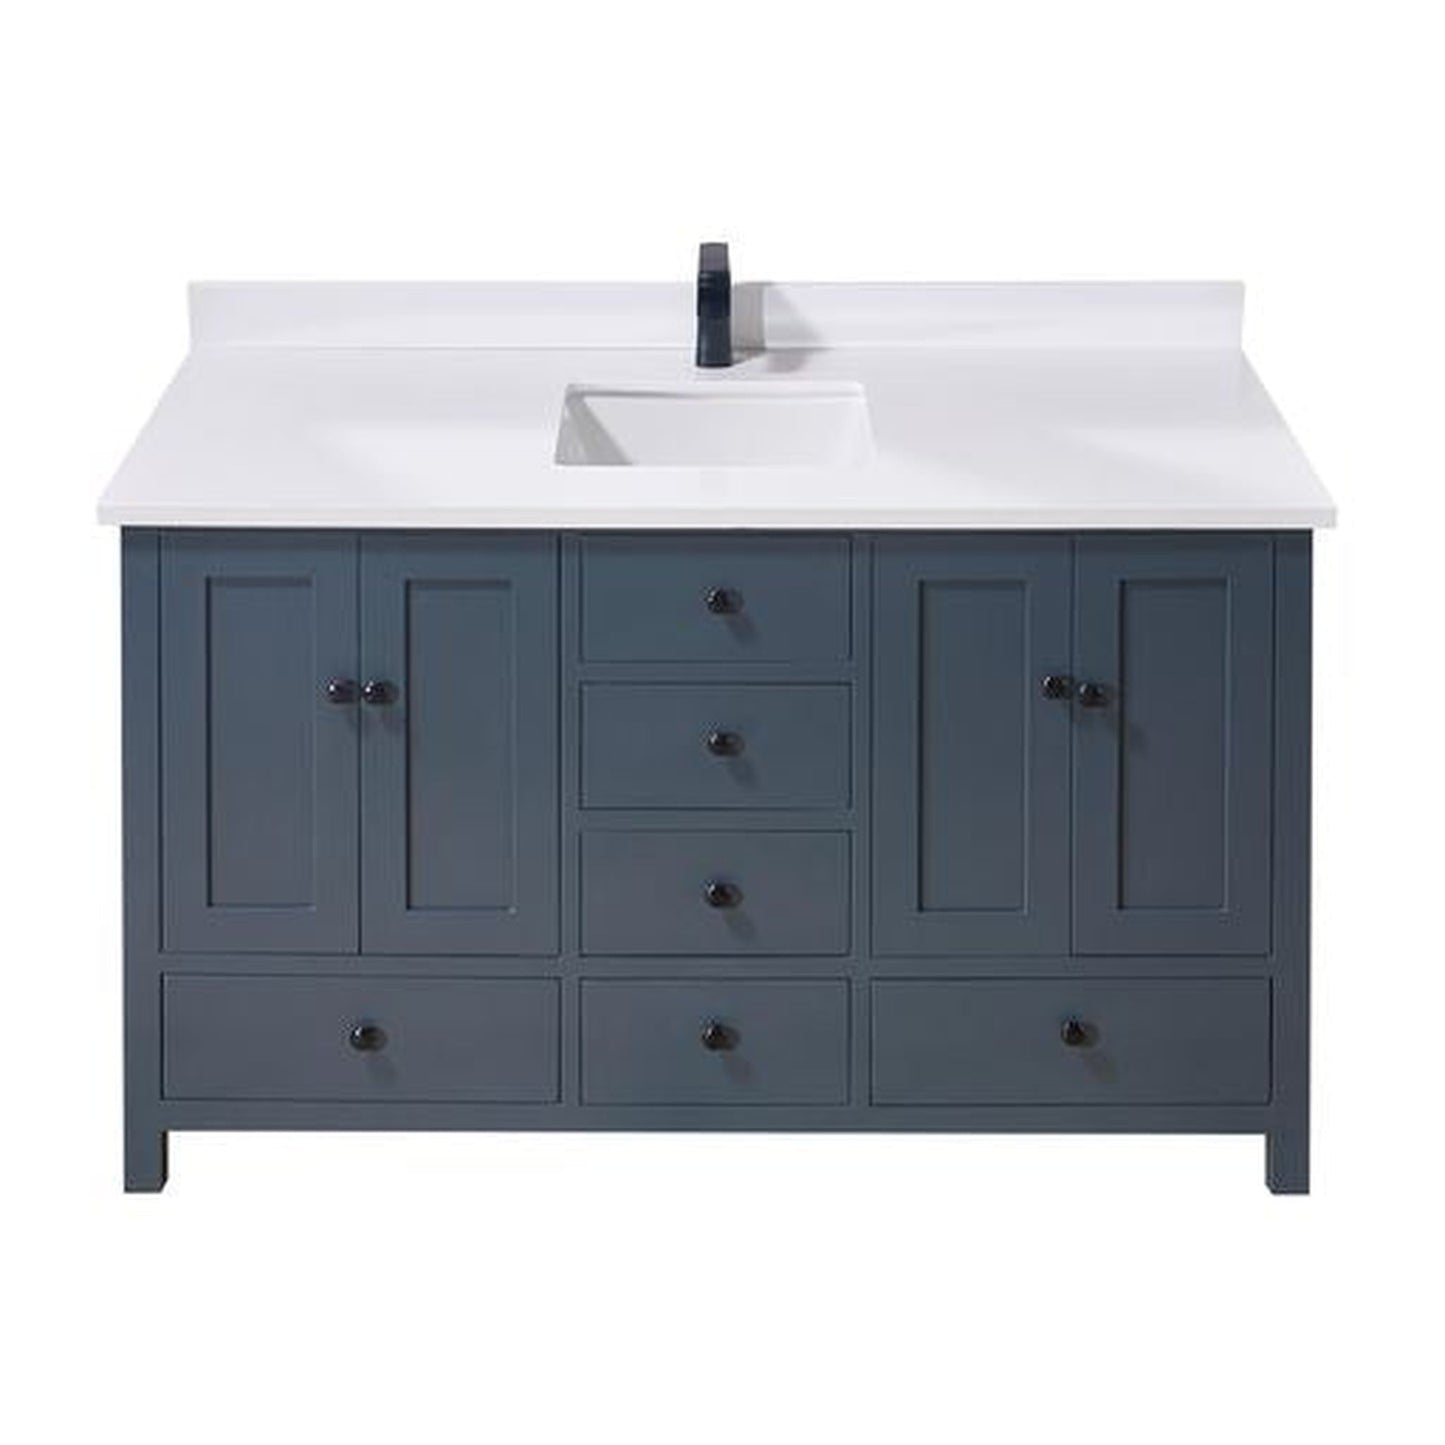 Altair Caorle 61" x 22" Snow White Composite Stone Bathroom Vanity Top With Single White SInk